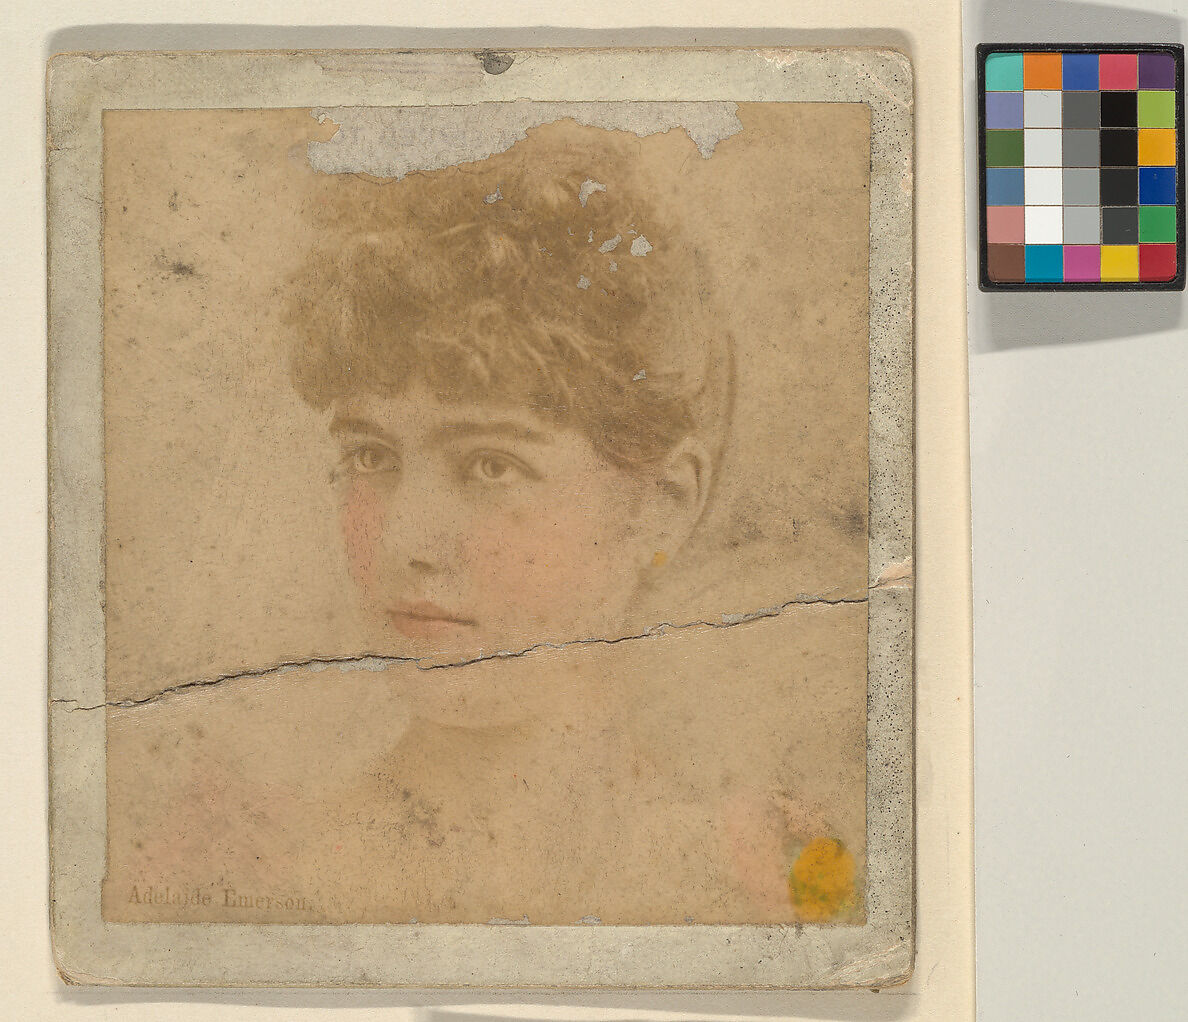 Adelaide Emerson, from the Actresses series (N246), Type 2, issued by Kinney Brothers to promote Sporting Extra Cigarettes, Issued by Kinney Brothers Tobacco Company, Albumen photograph 